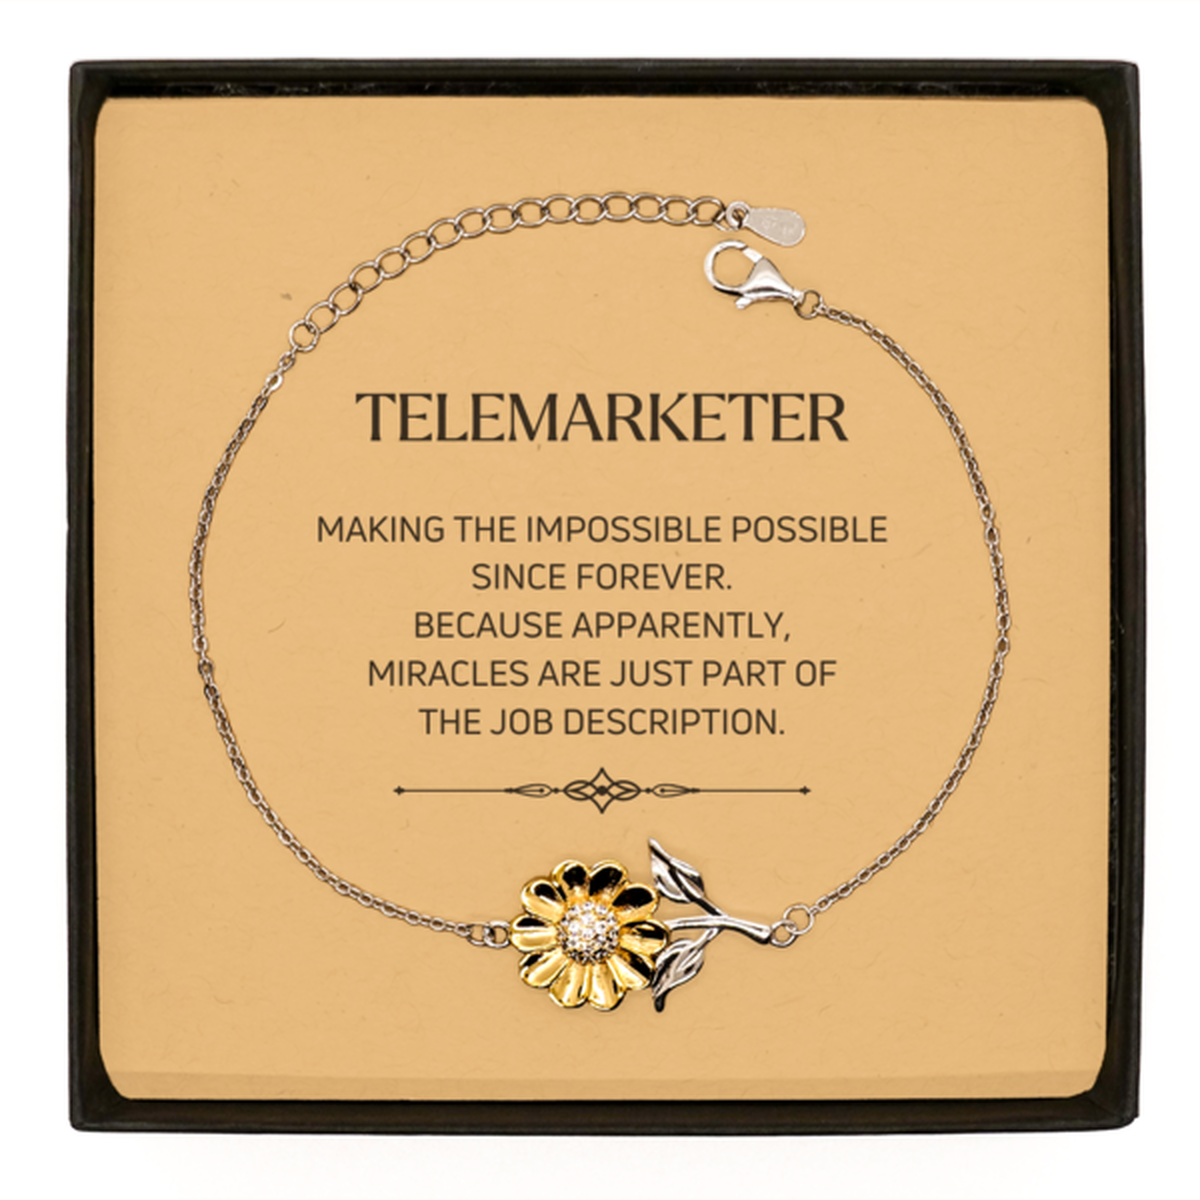 Funny Telemarketer Gifts, Miracles are just part of the job description, Inspirational Birthday Sunflower Bracelet For Telemarketer, Men, Women, Coworkers, Friends, Boss